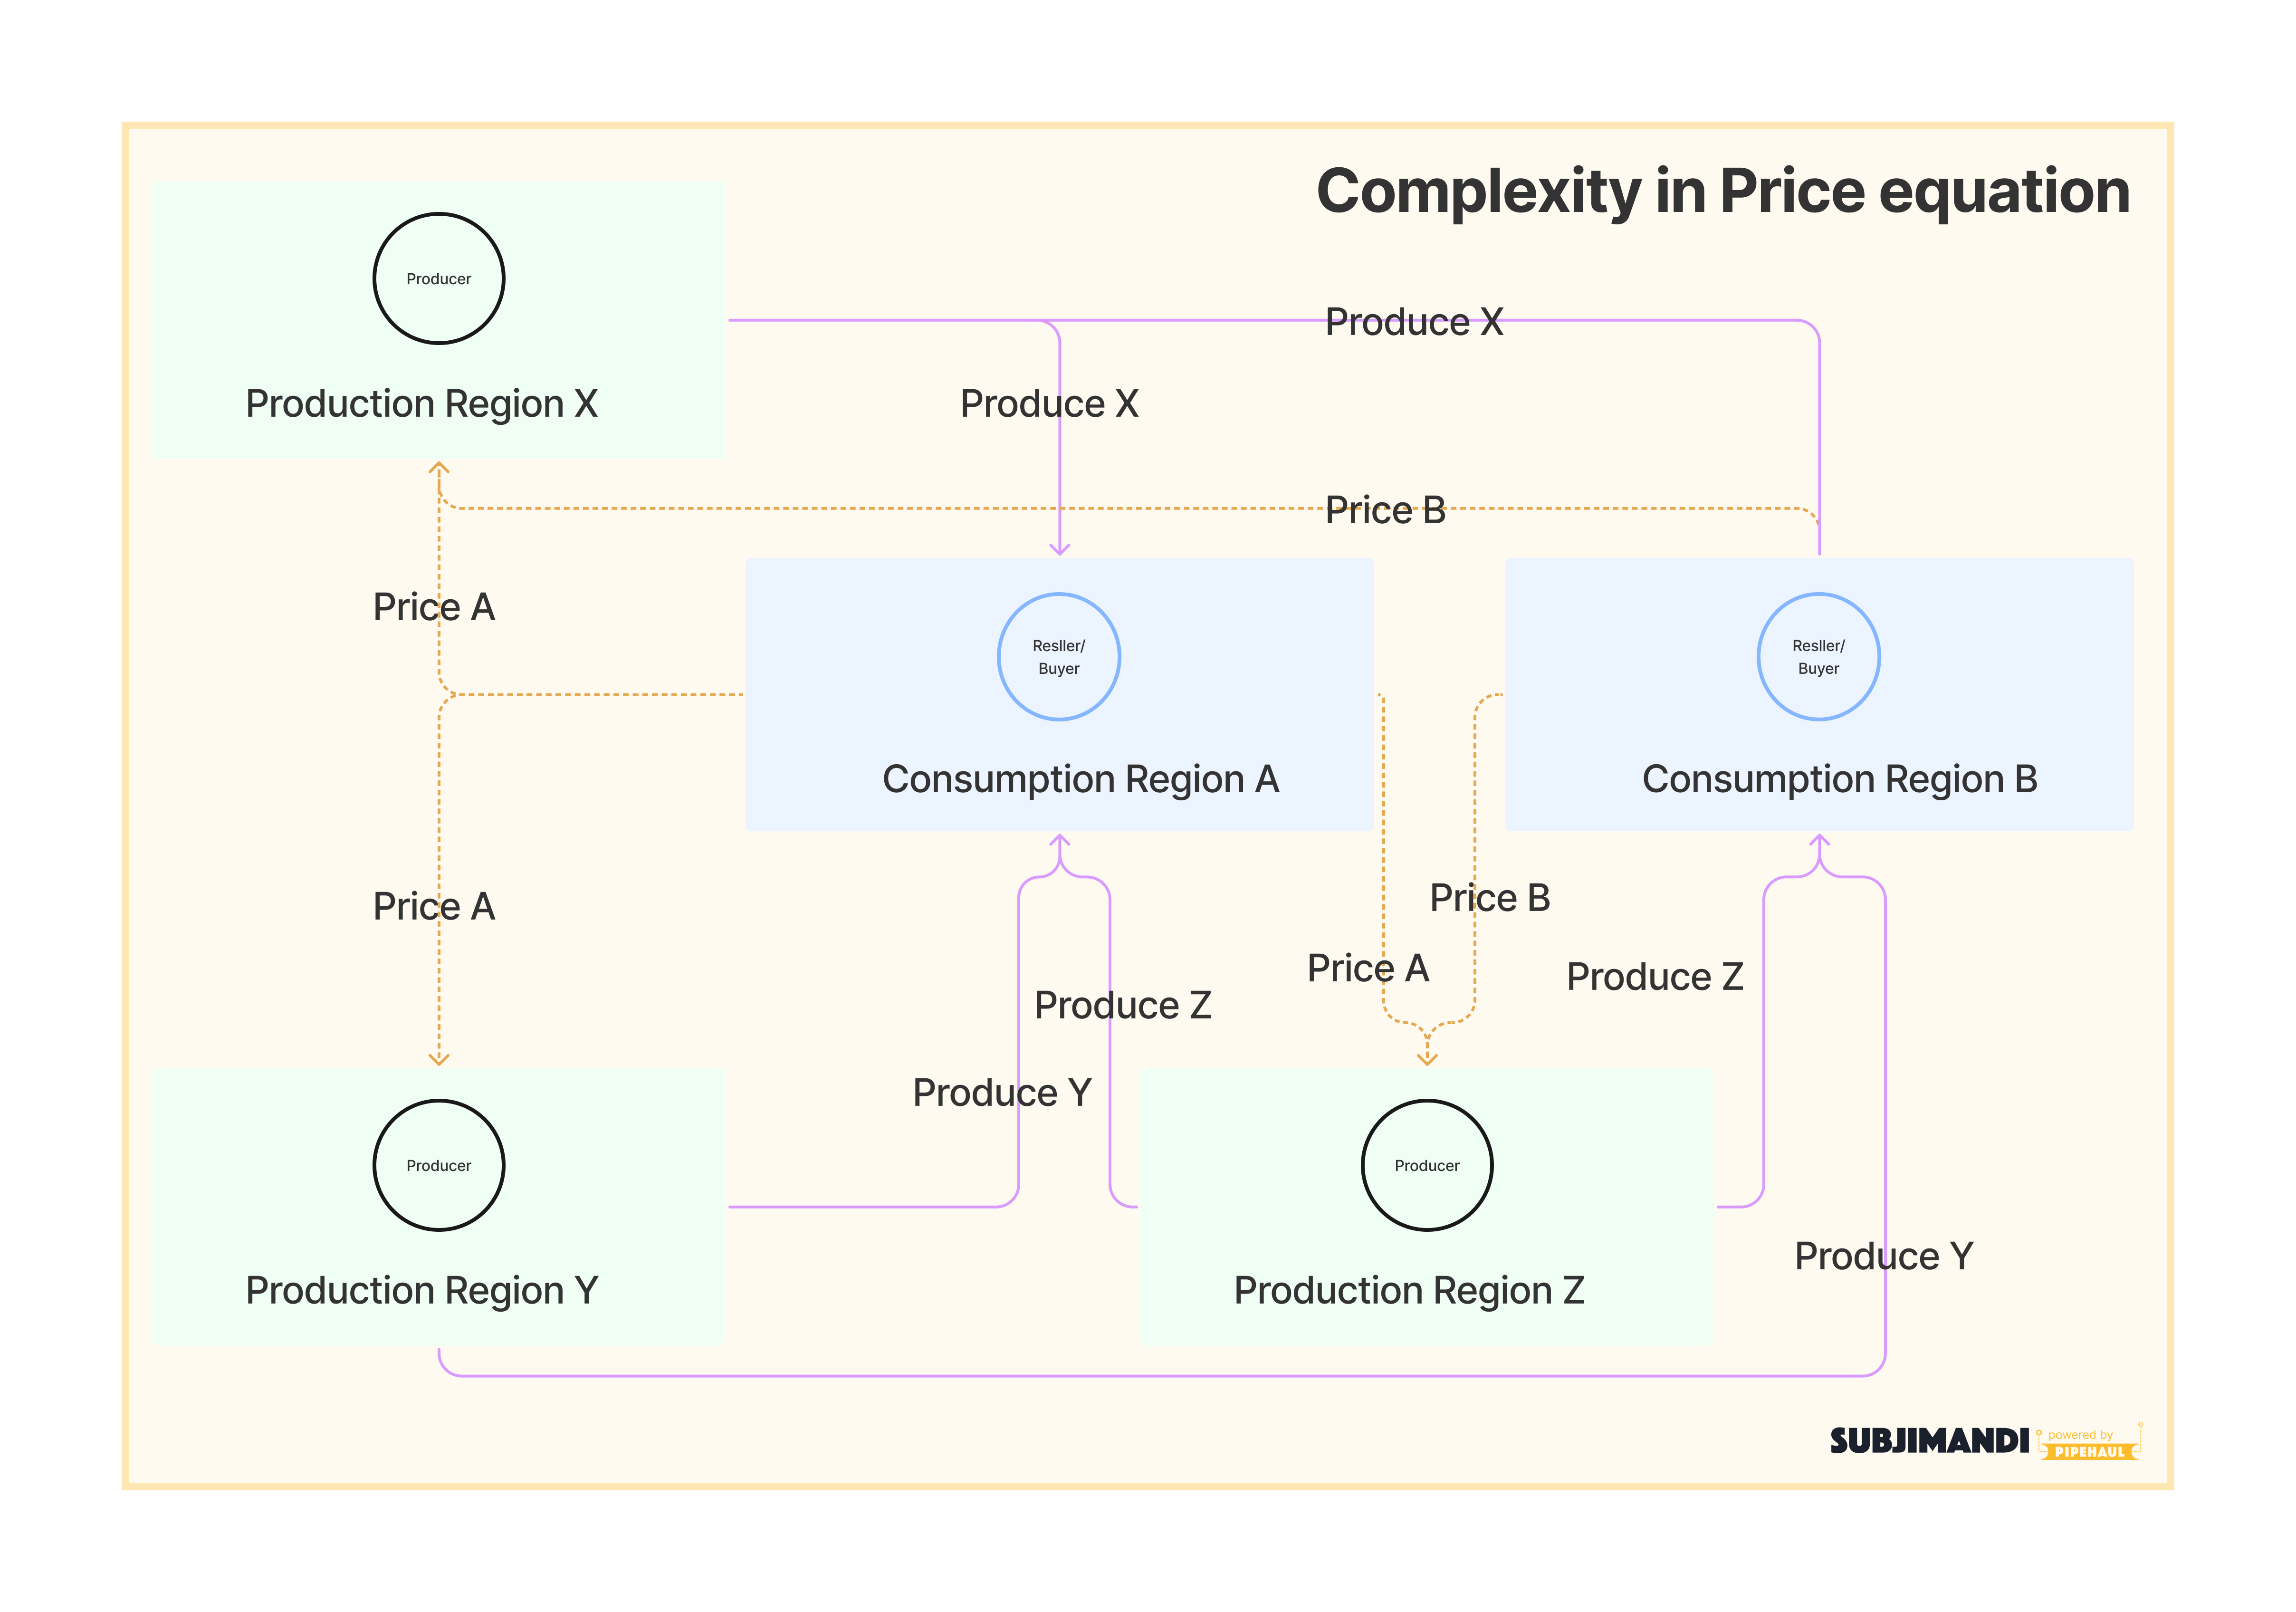 The complexity of produce and price equation among regions